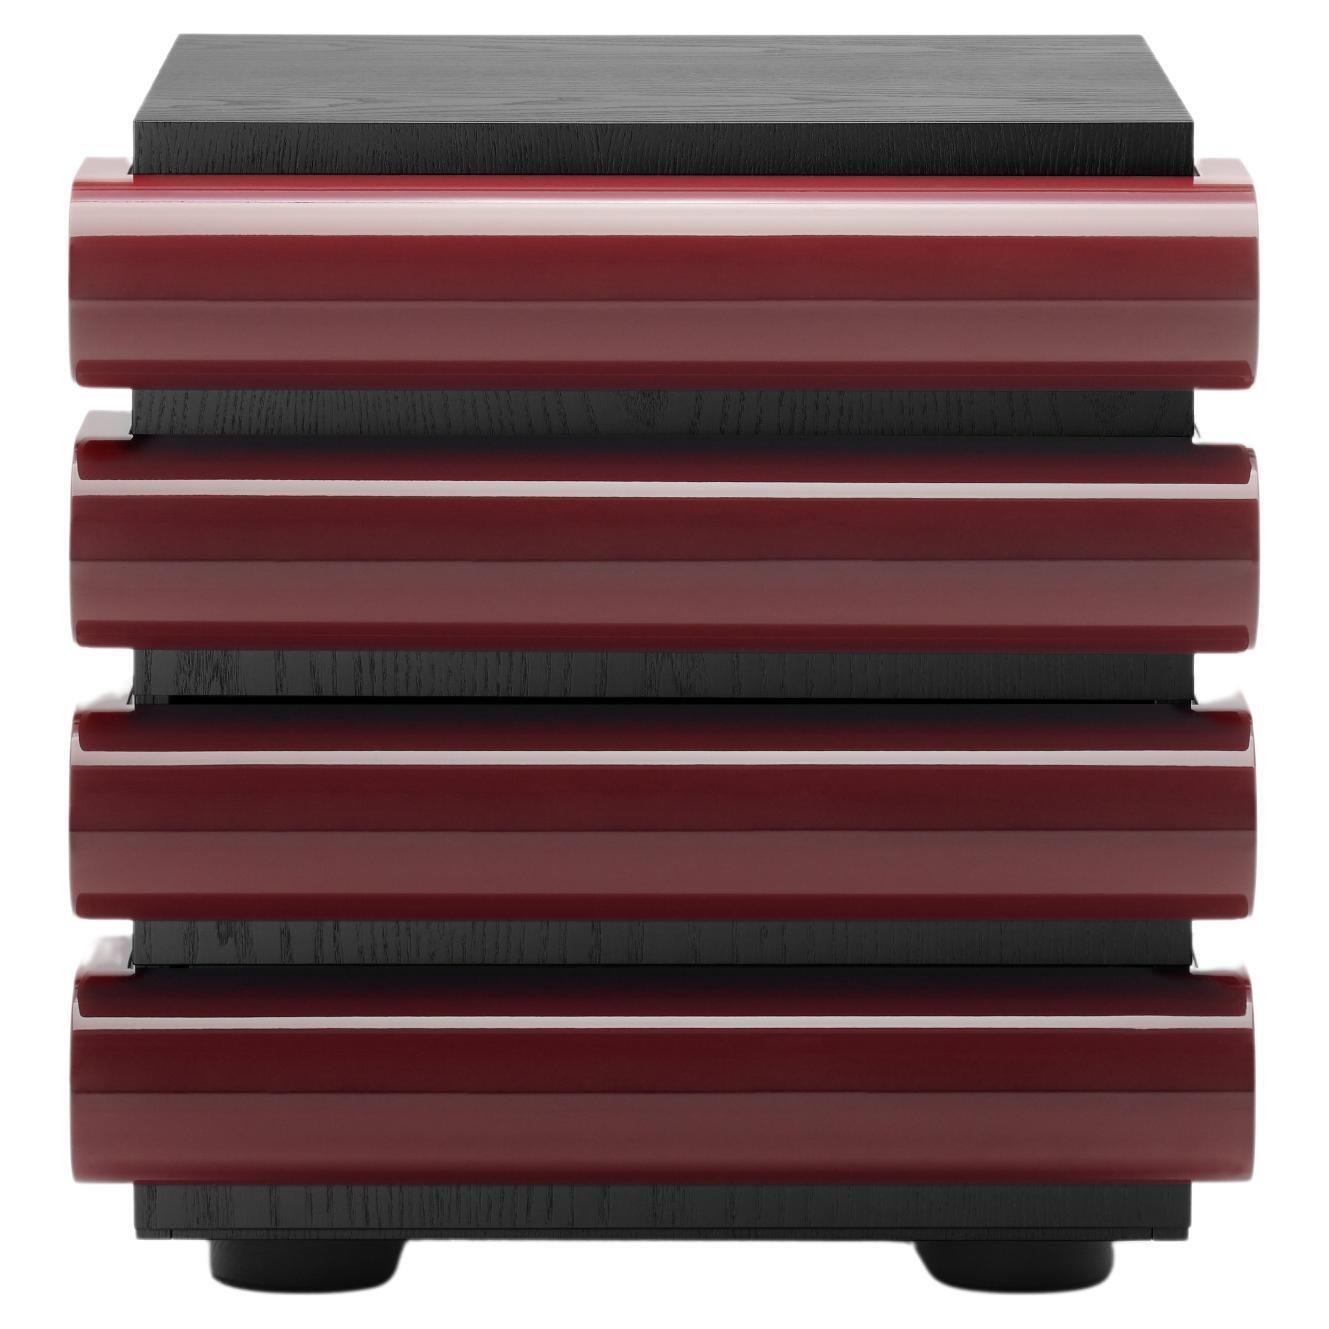 Acerbis Storet Drawers Cabinet in Black Ash with Bordeaux Glossy Lacquered  For Sale